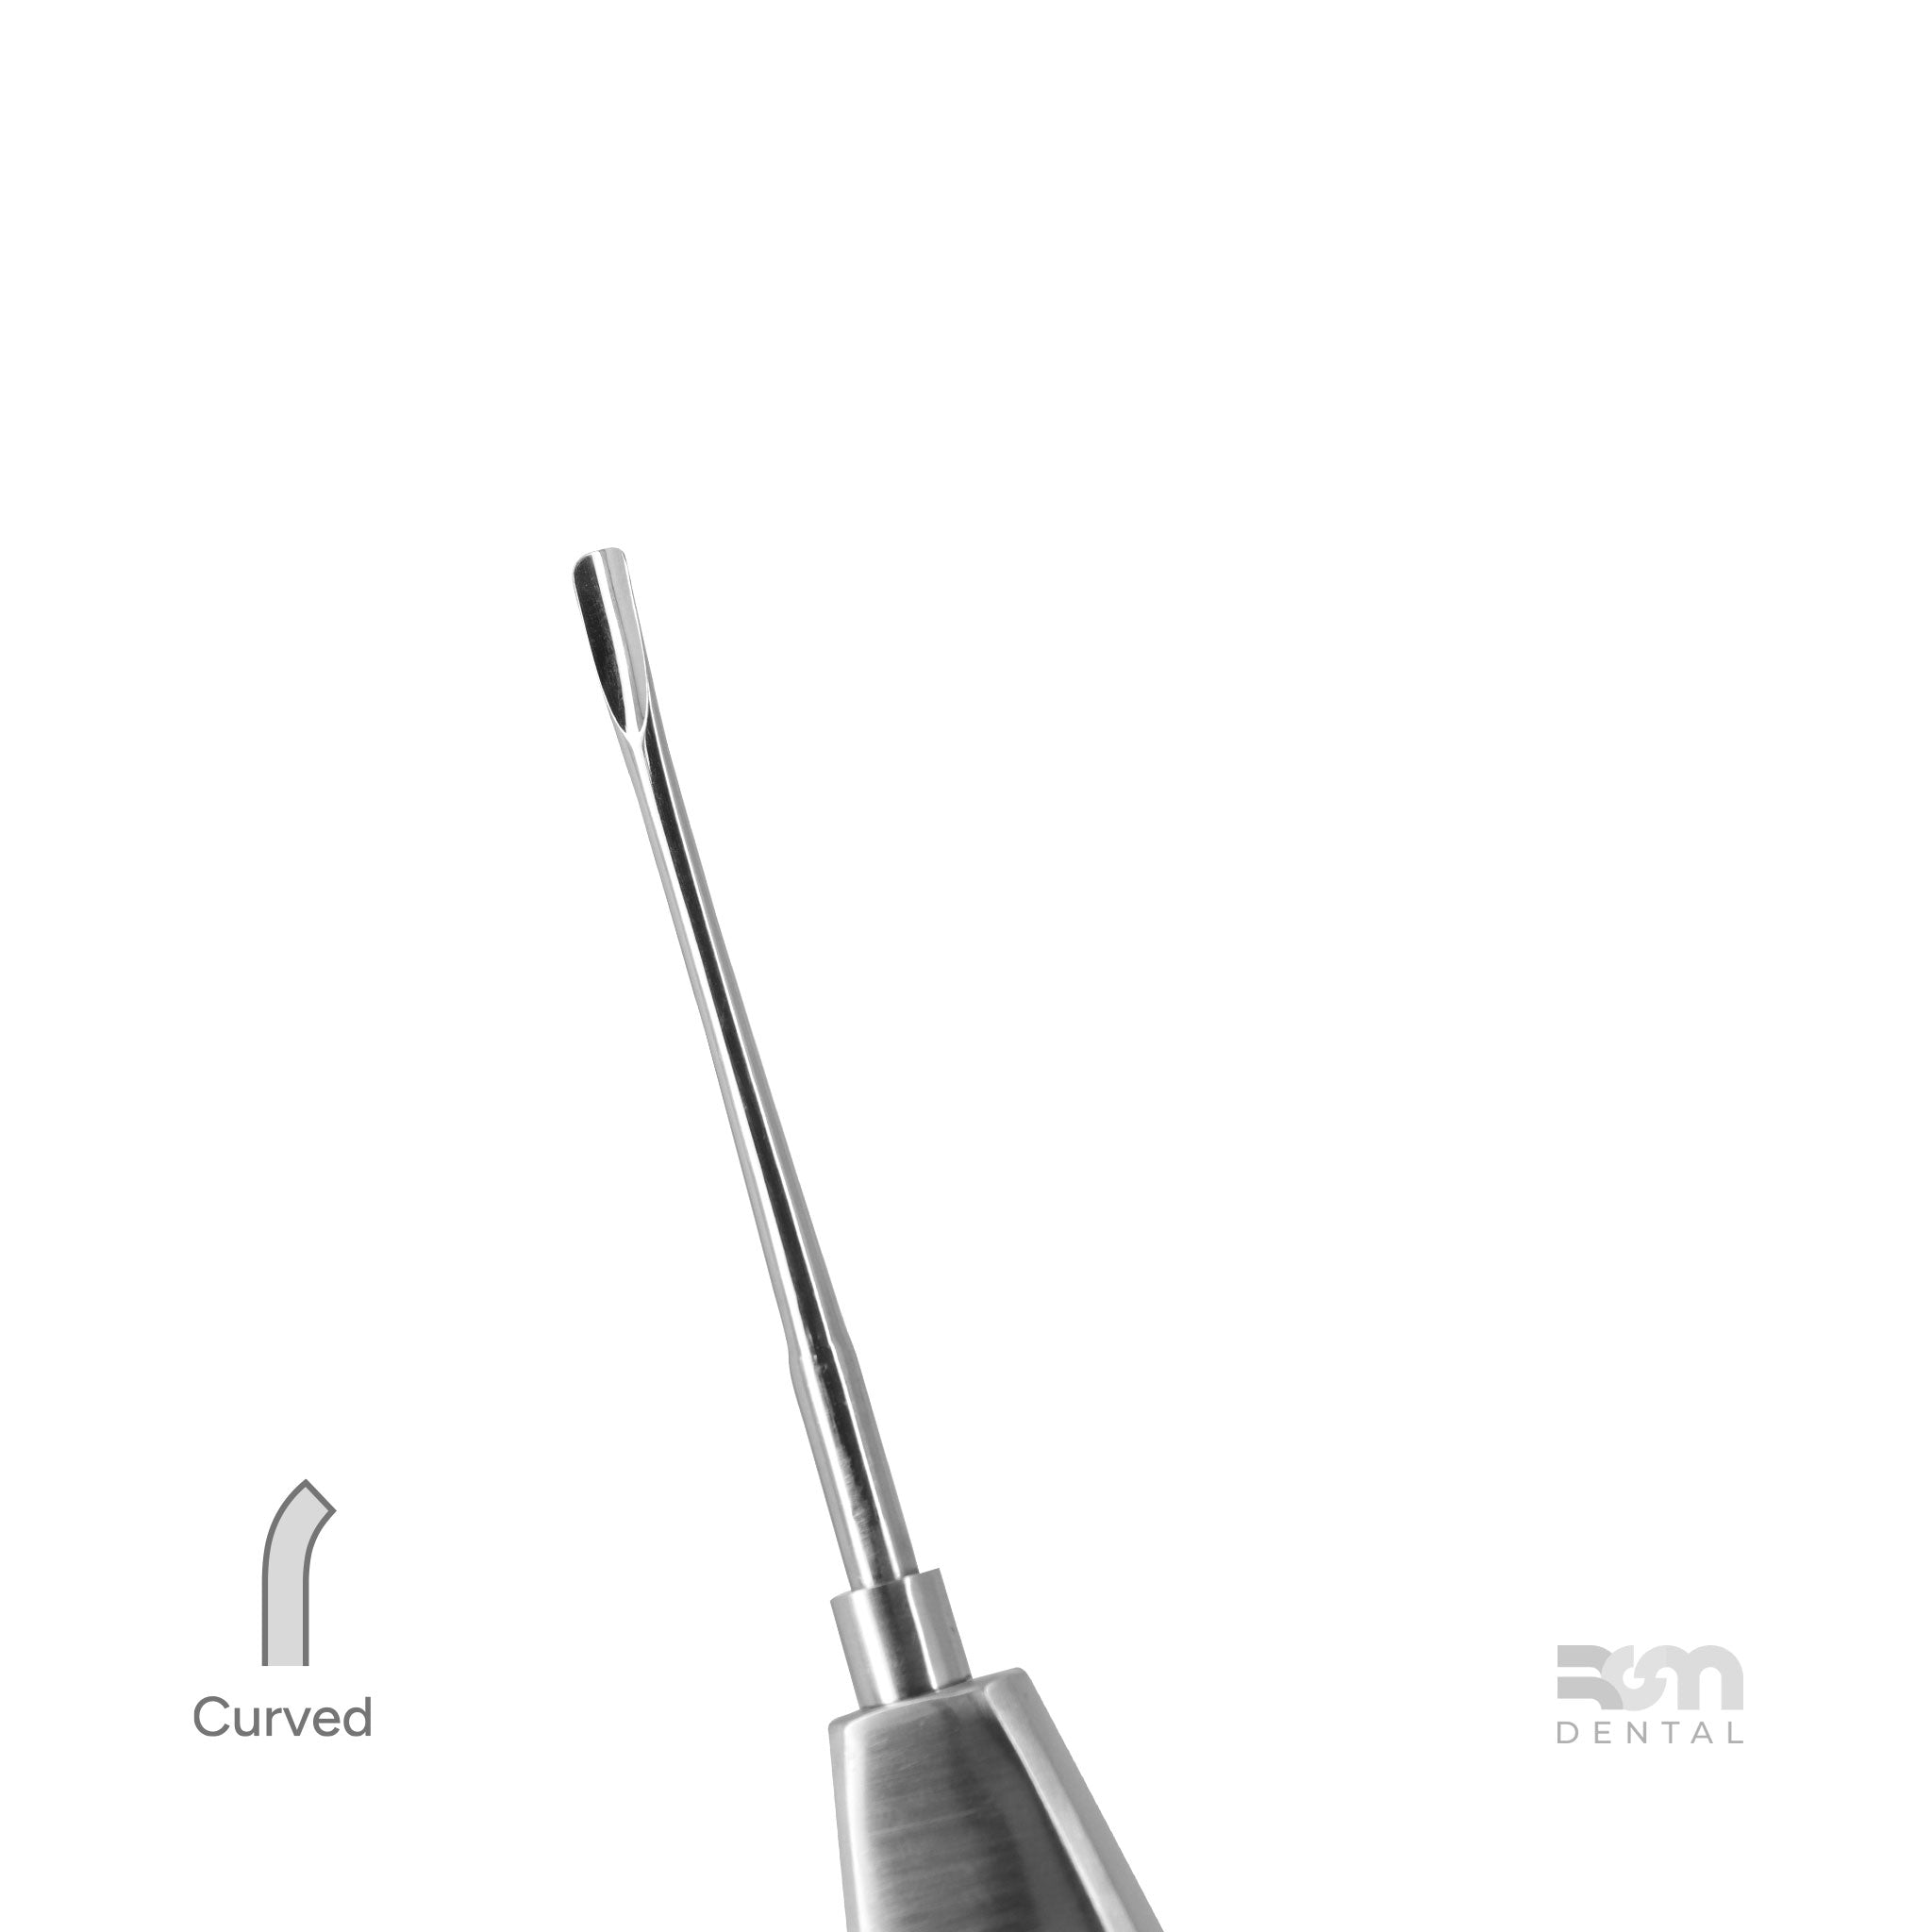 Luxator LUX-10 : Curved 5.0mm